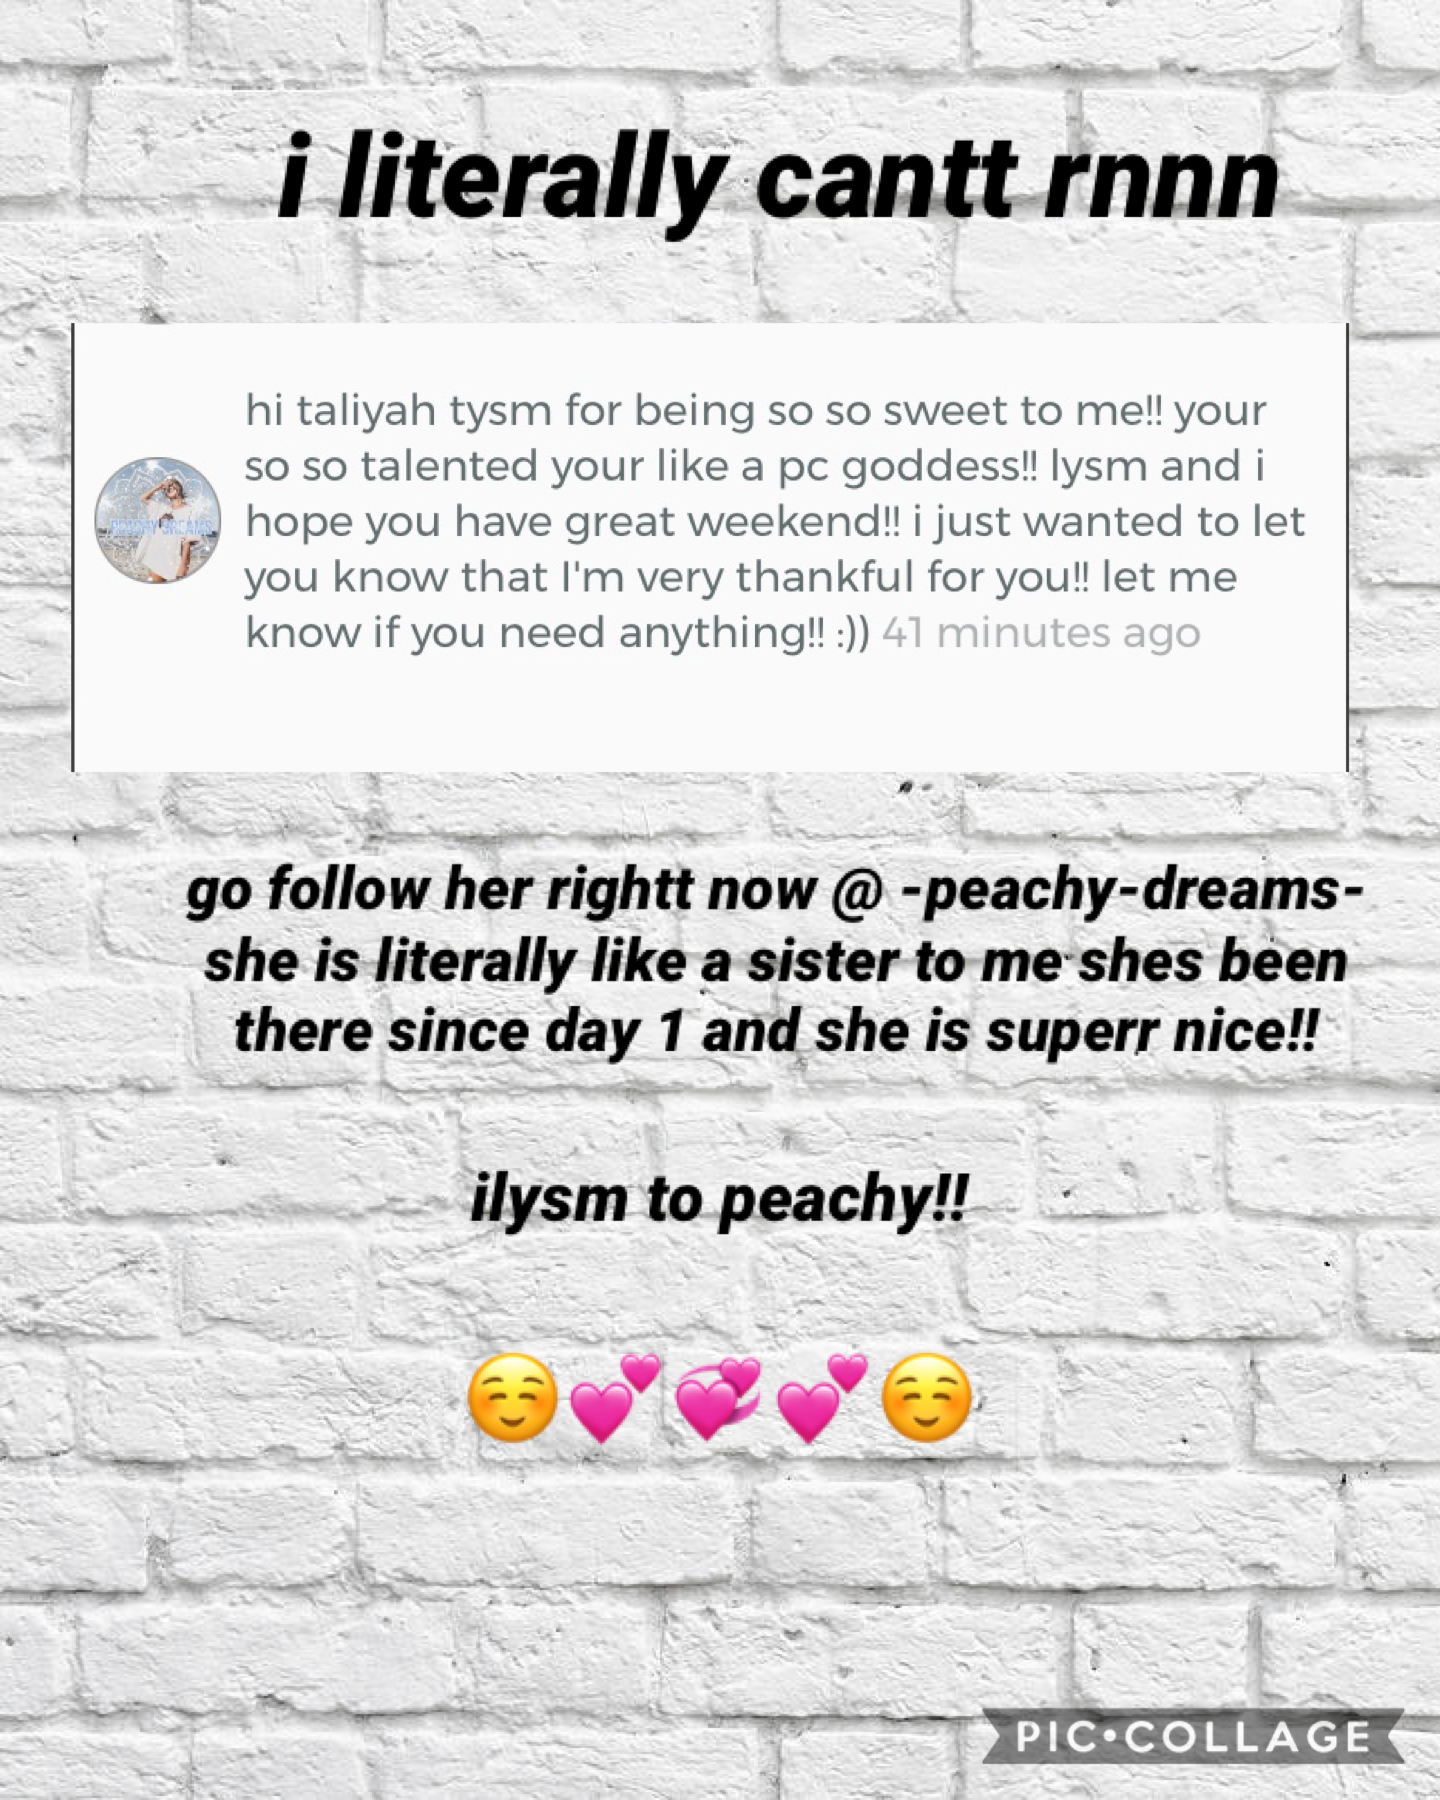 TAPP!
Bruhh this made my whole day and today has been bittersweet💞
Go follow @peachy-dreams-!!☺️💕